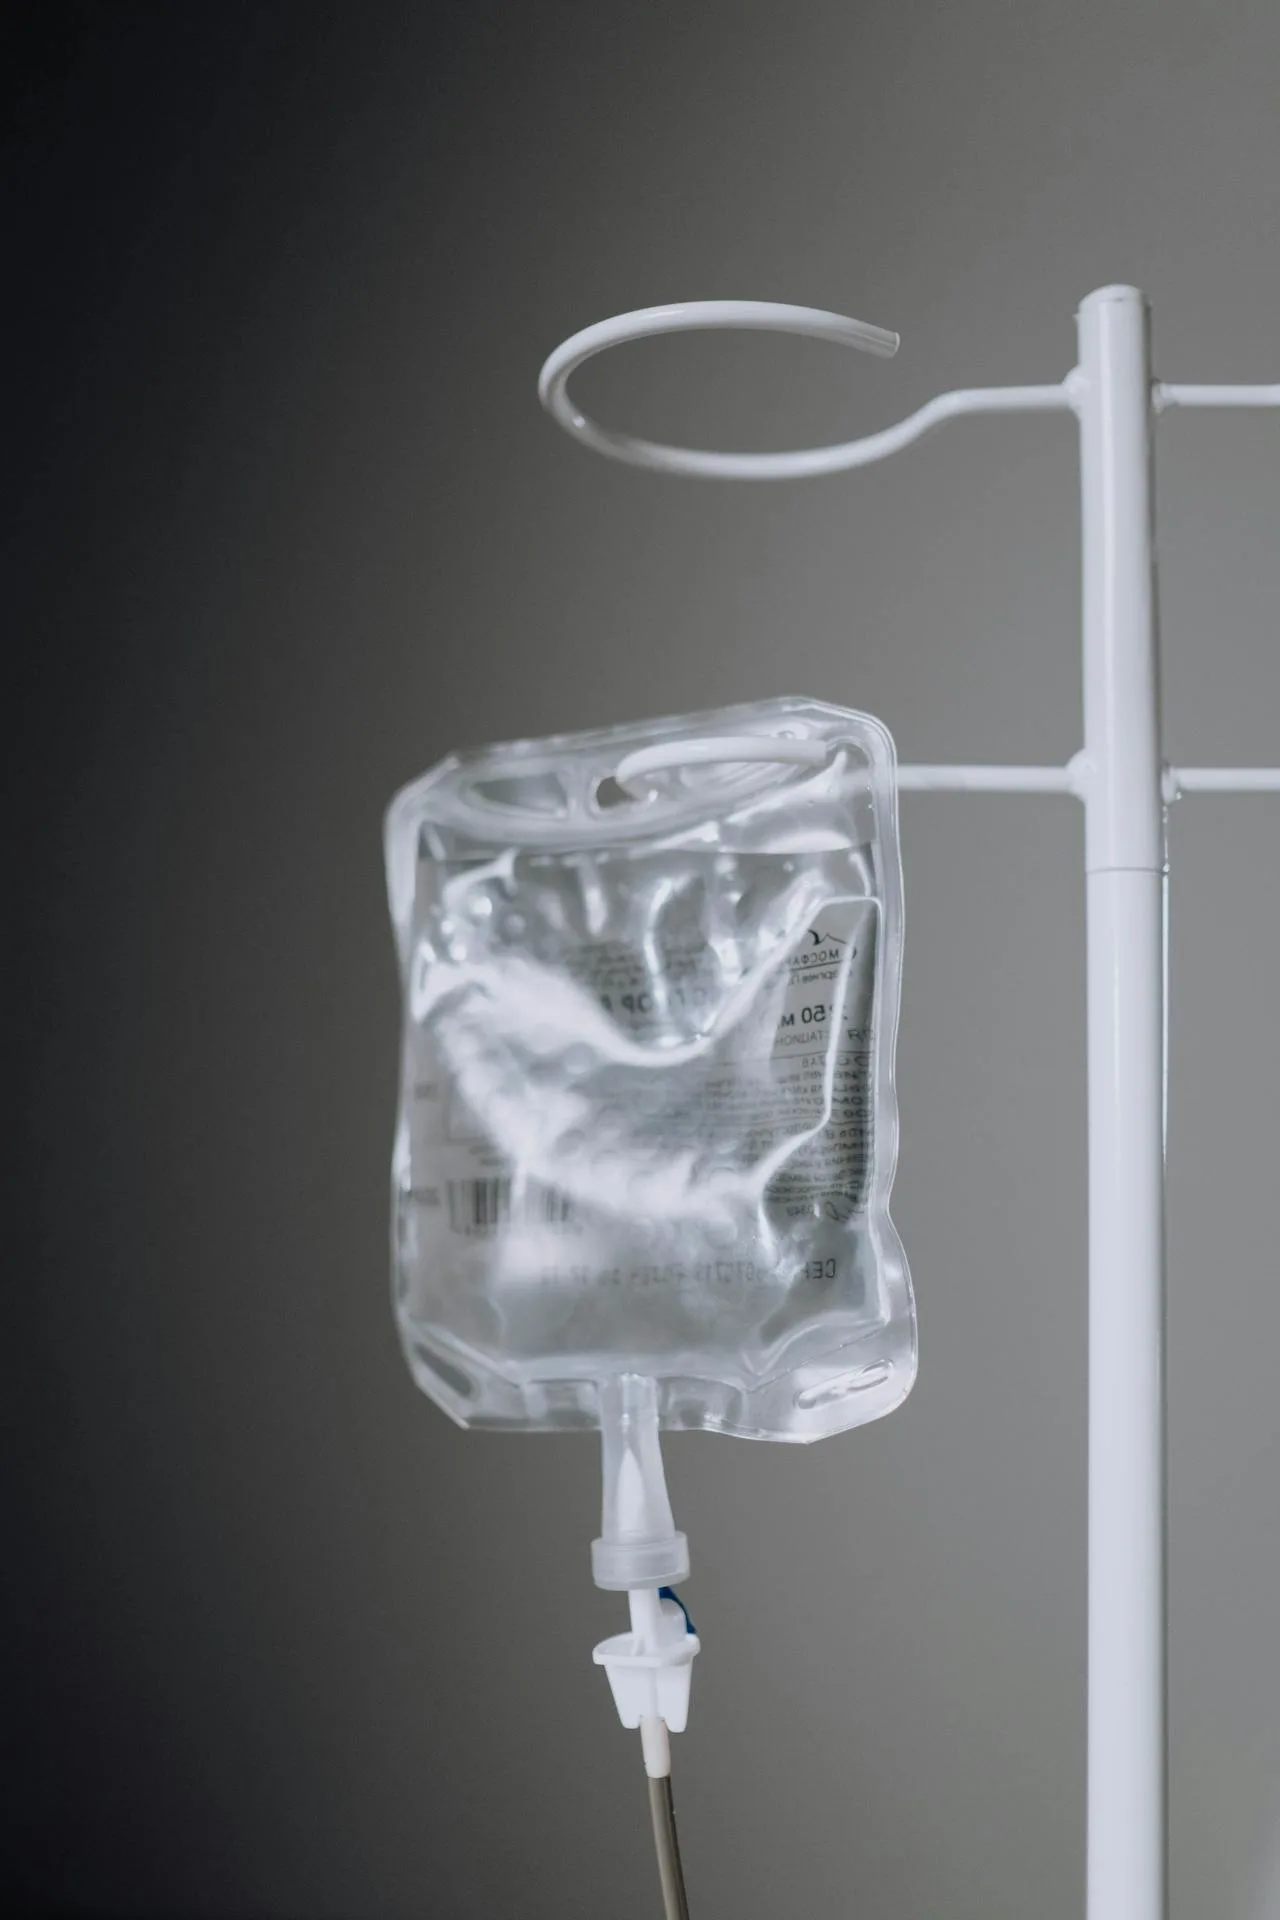 Unregulated Spaces Pose Health Risks with IV Drips and Injections, Warns FDA